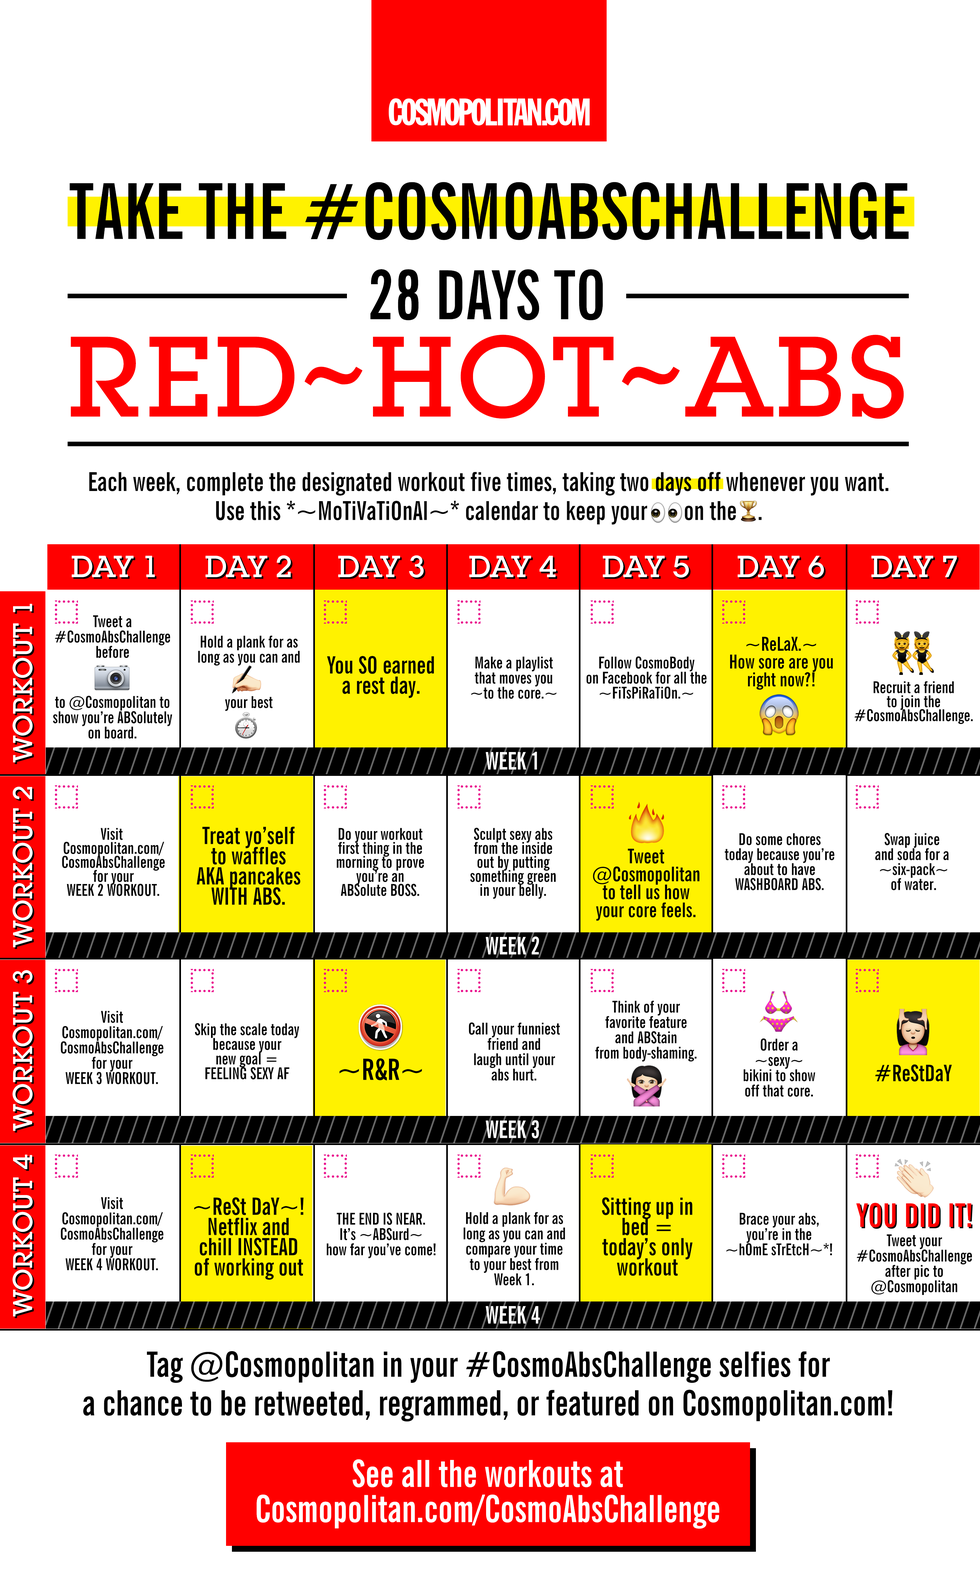 Tight Core / Abs Workout - SAVE and SEND to your besties